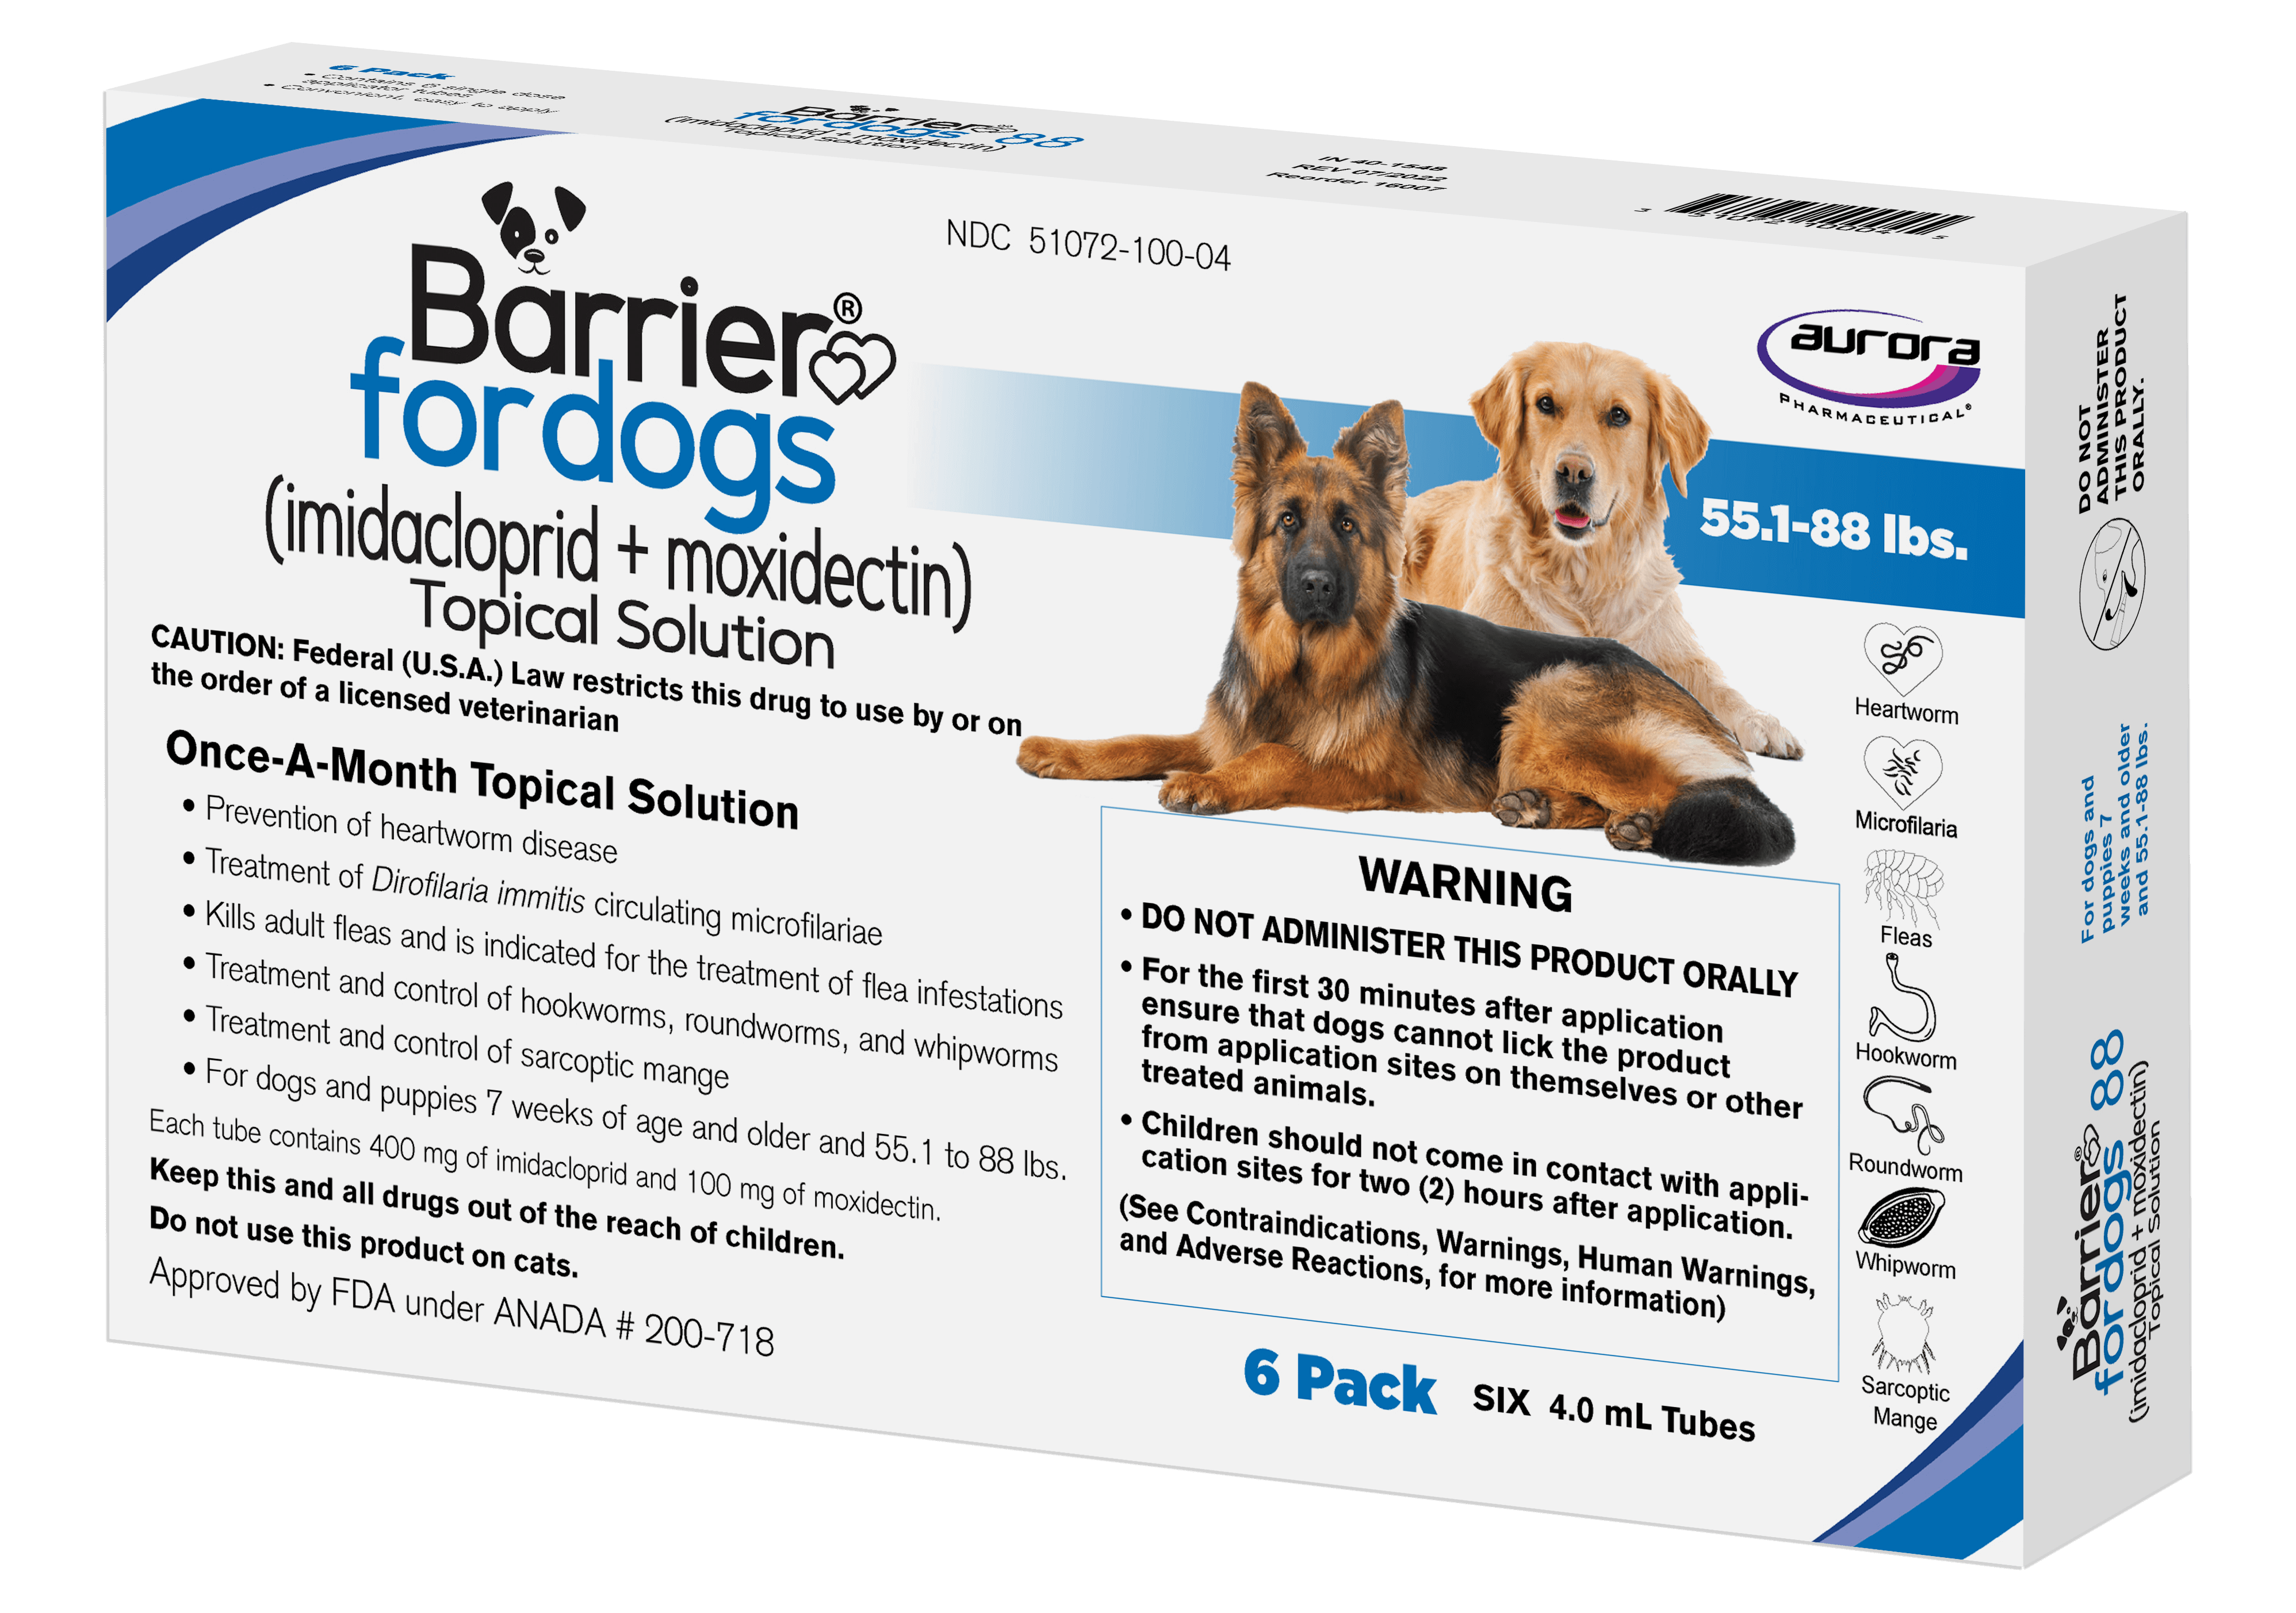 barrier-for-dogs-55.1-88-lbs-png